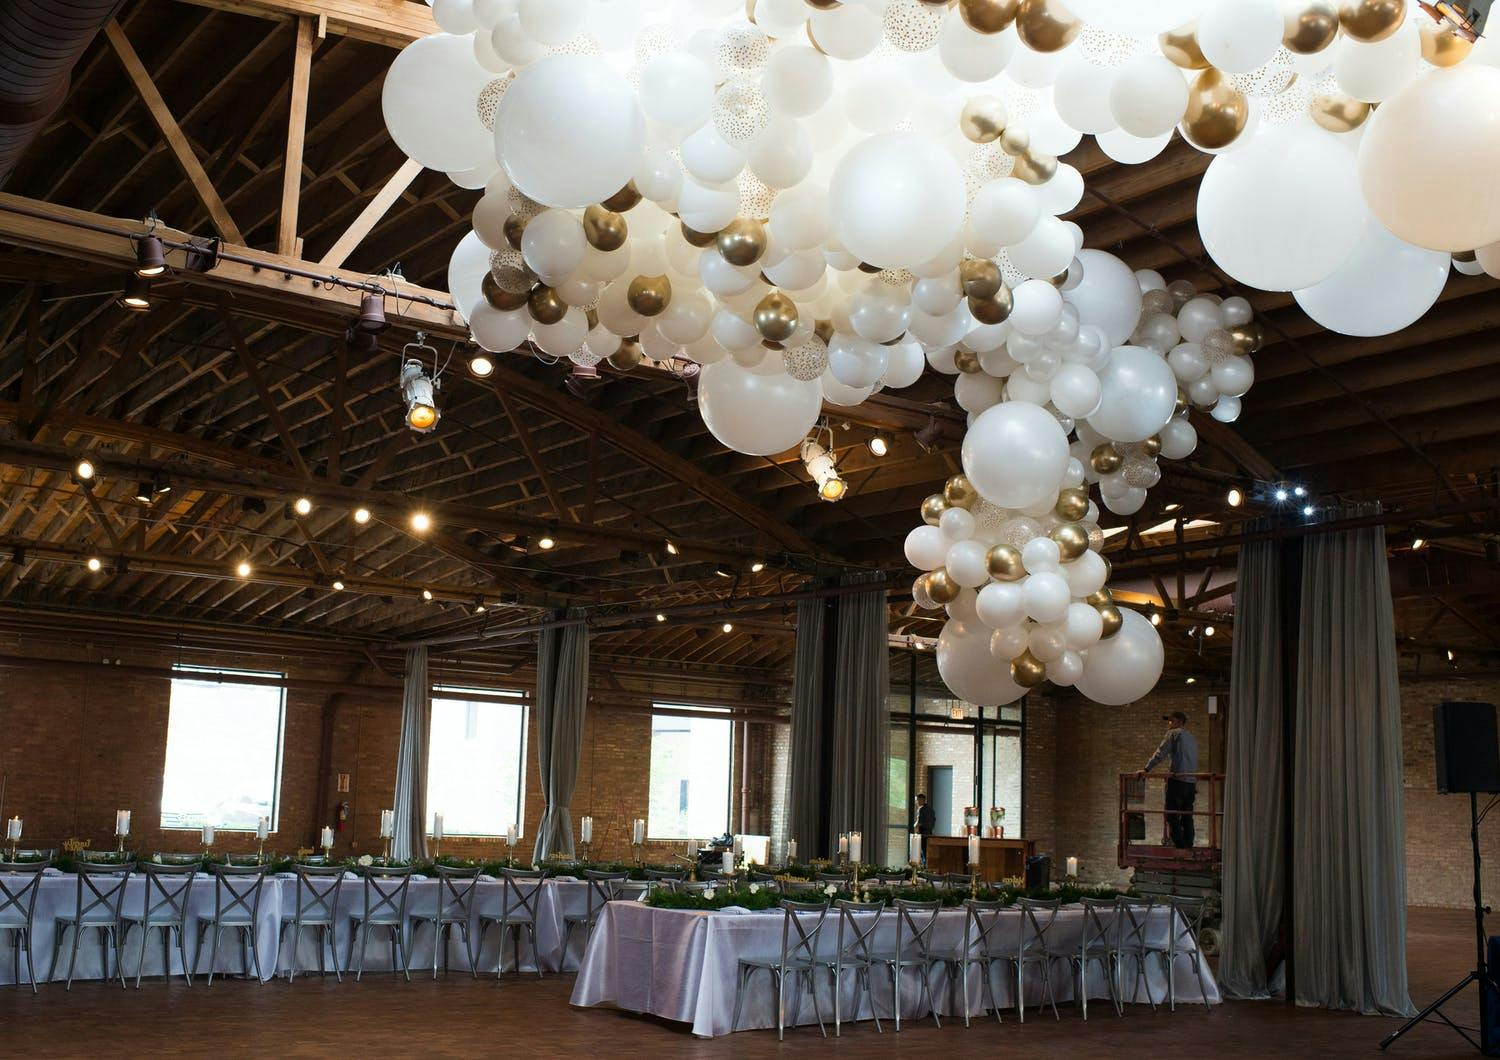 Giant white and gold balloon ceiling installation at rustic-style wedding | PartySlate